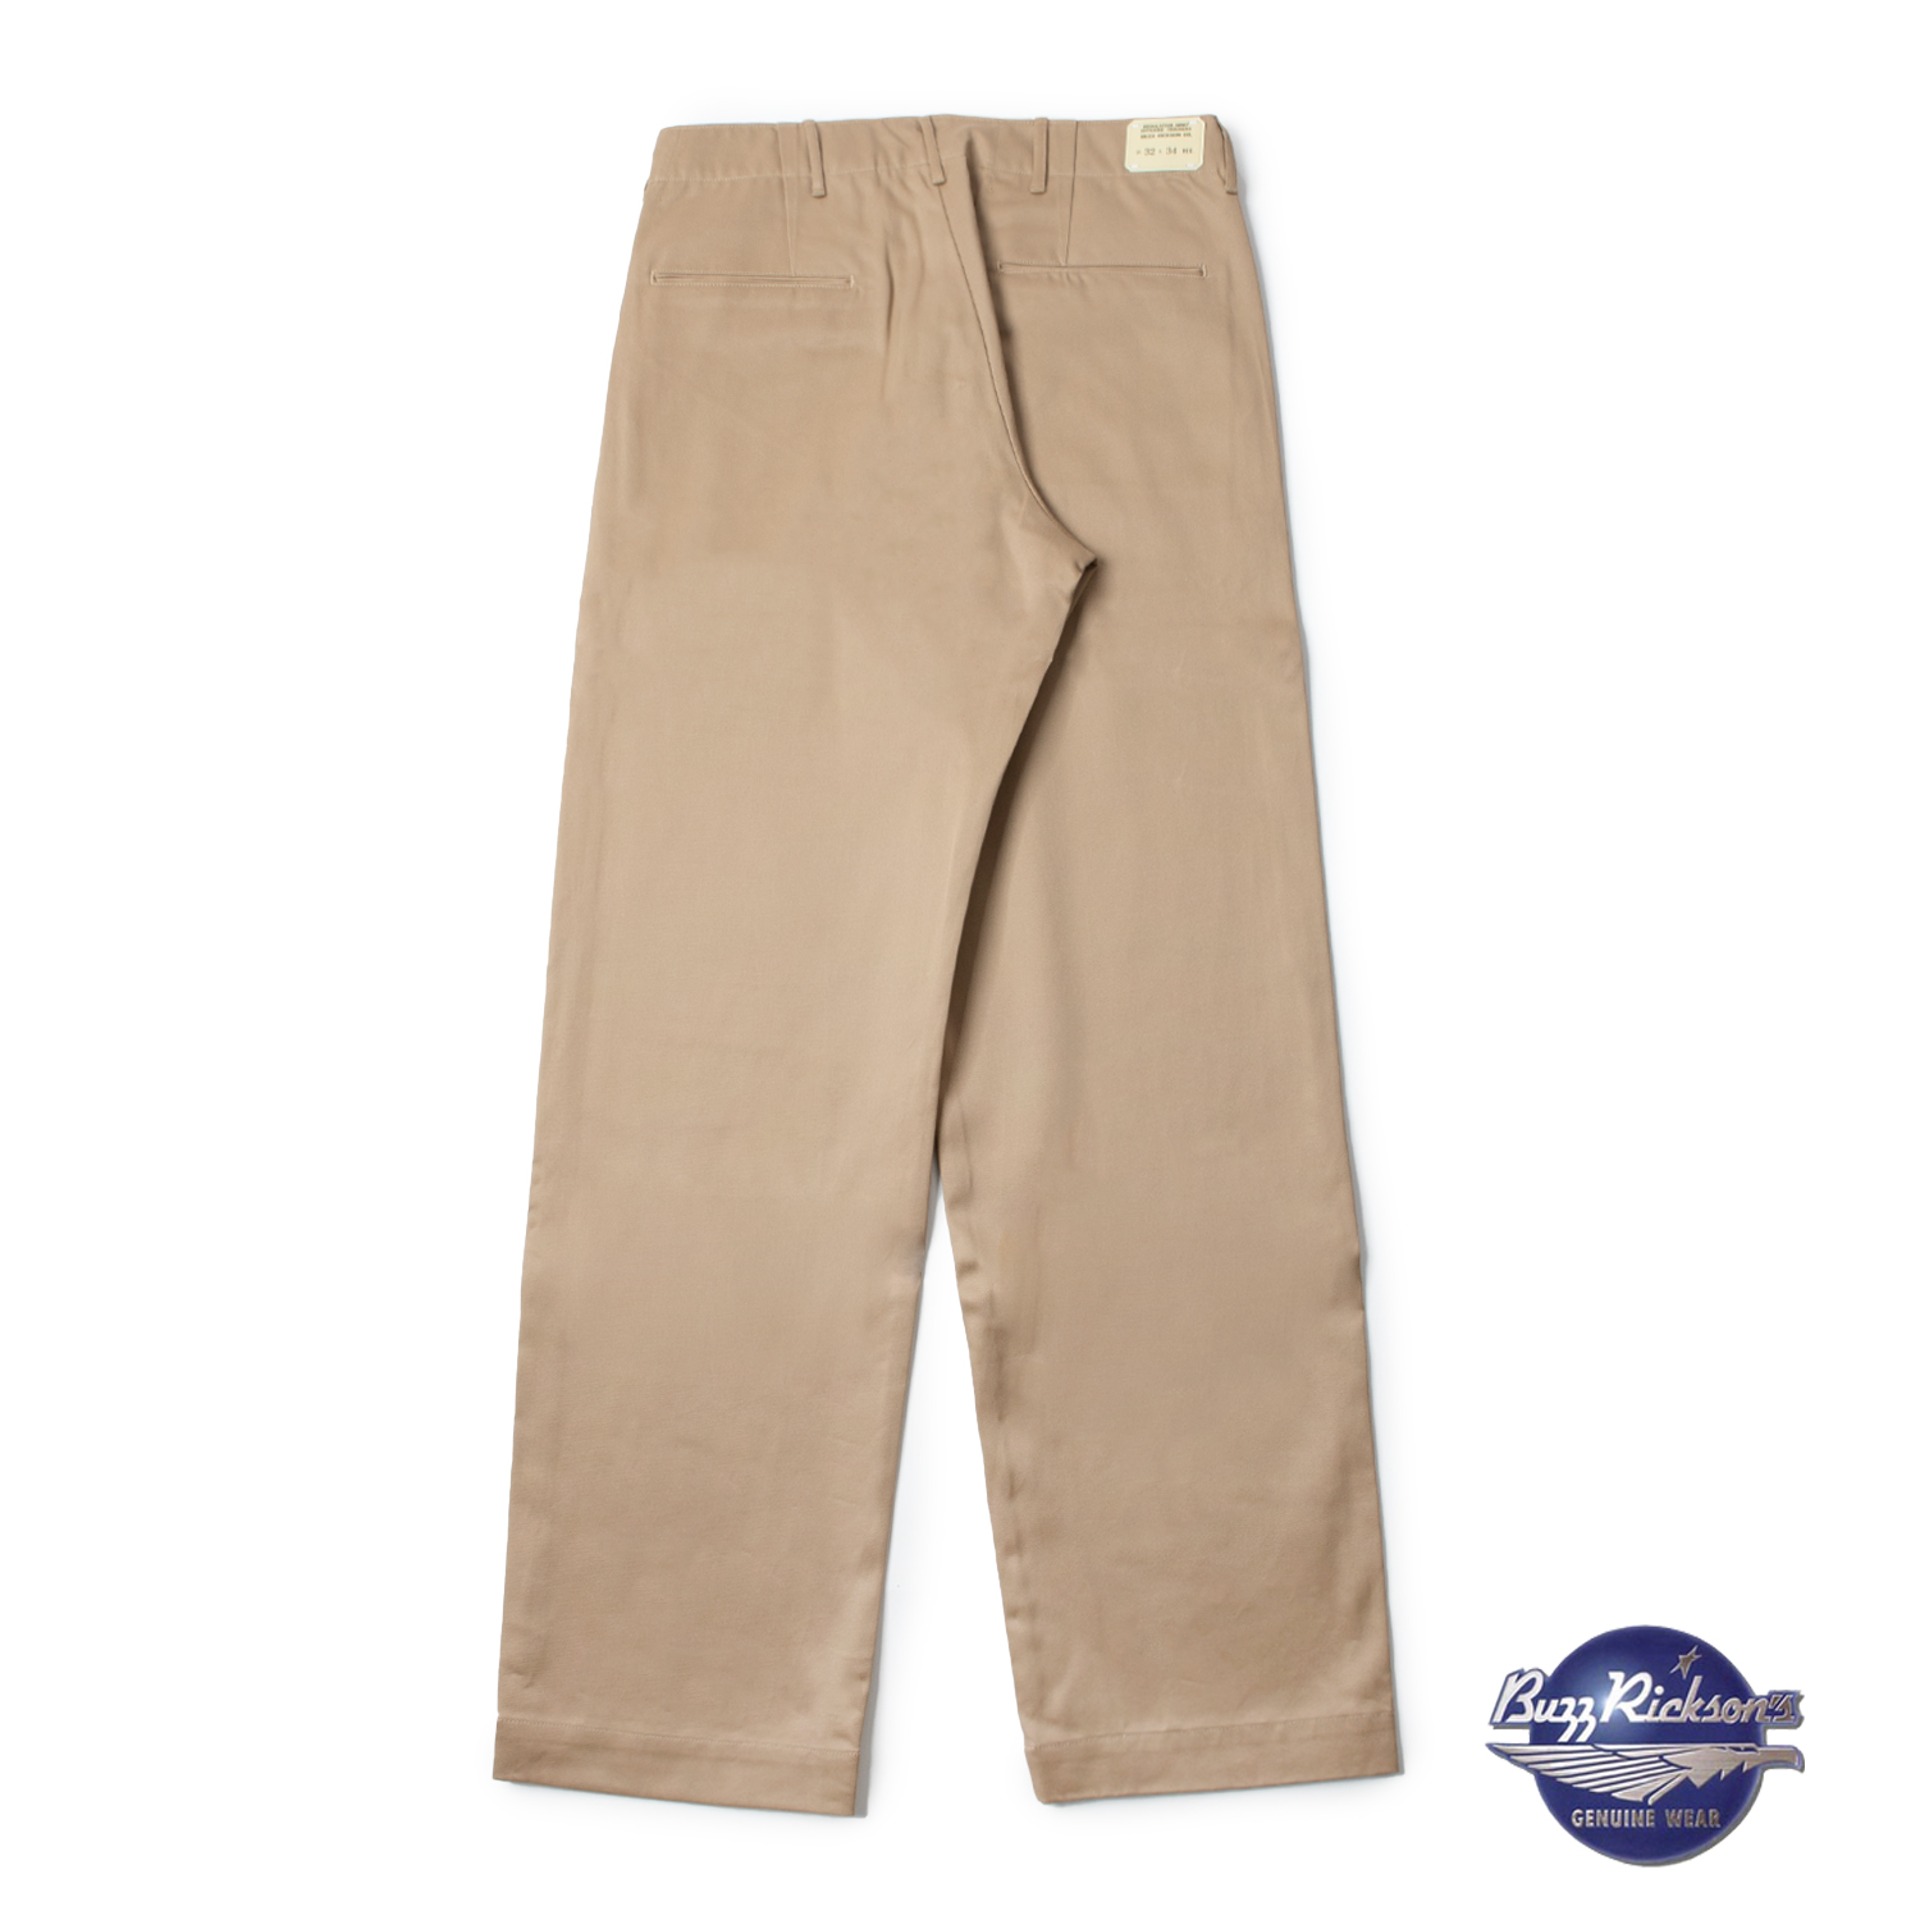 EARLY MILITARY CHINOS 1945 MODEL (Beige)